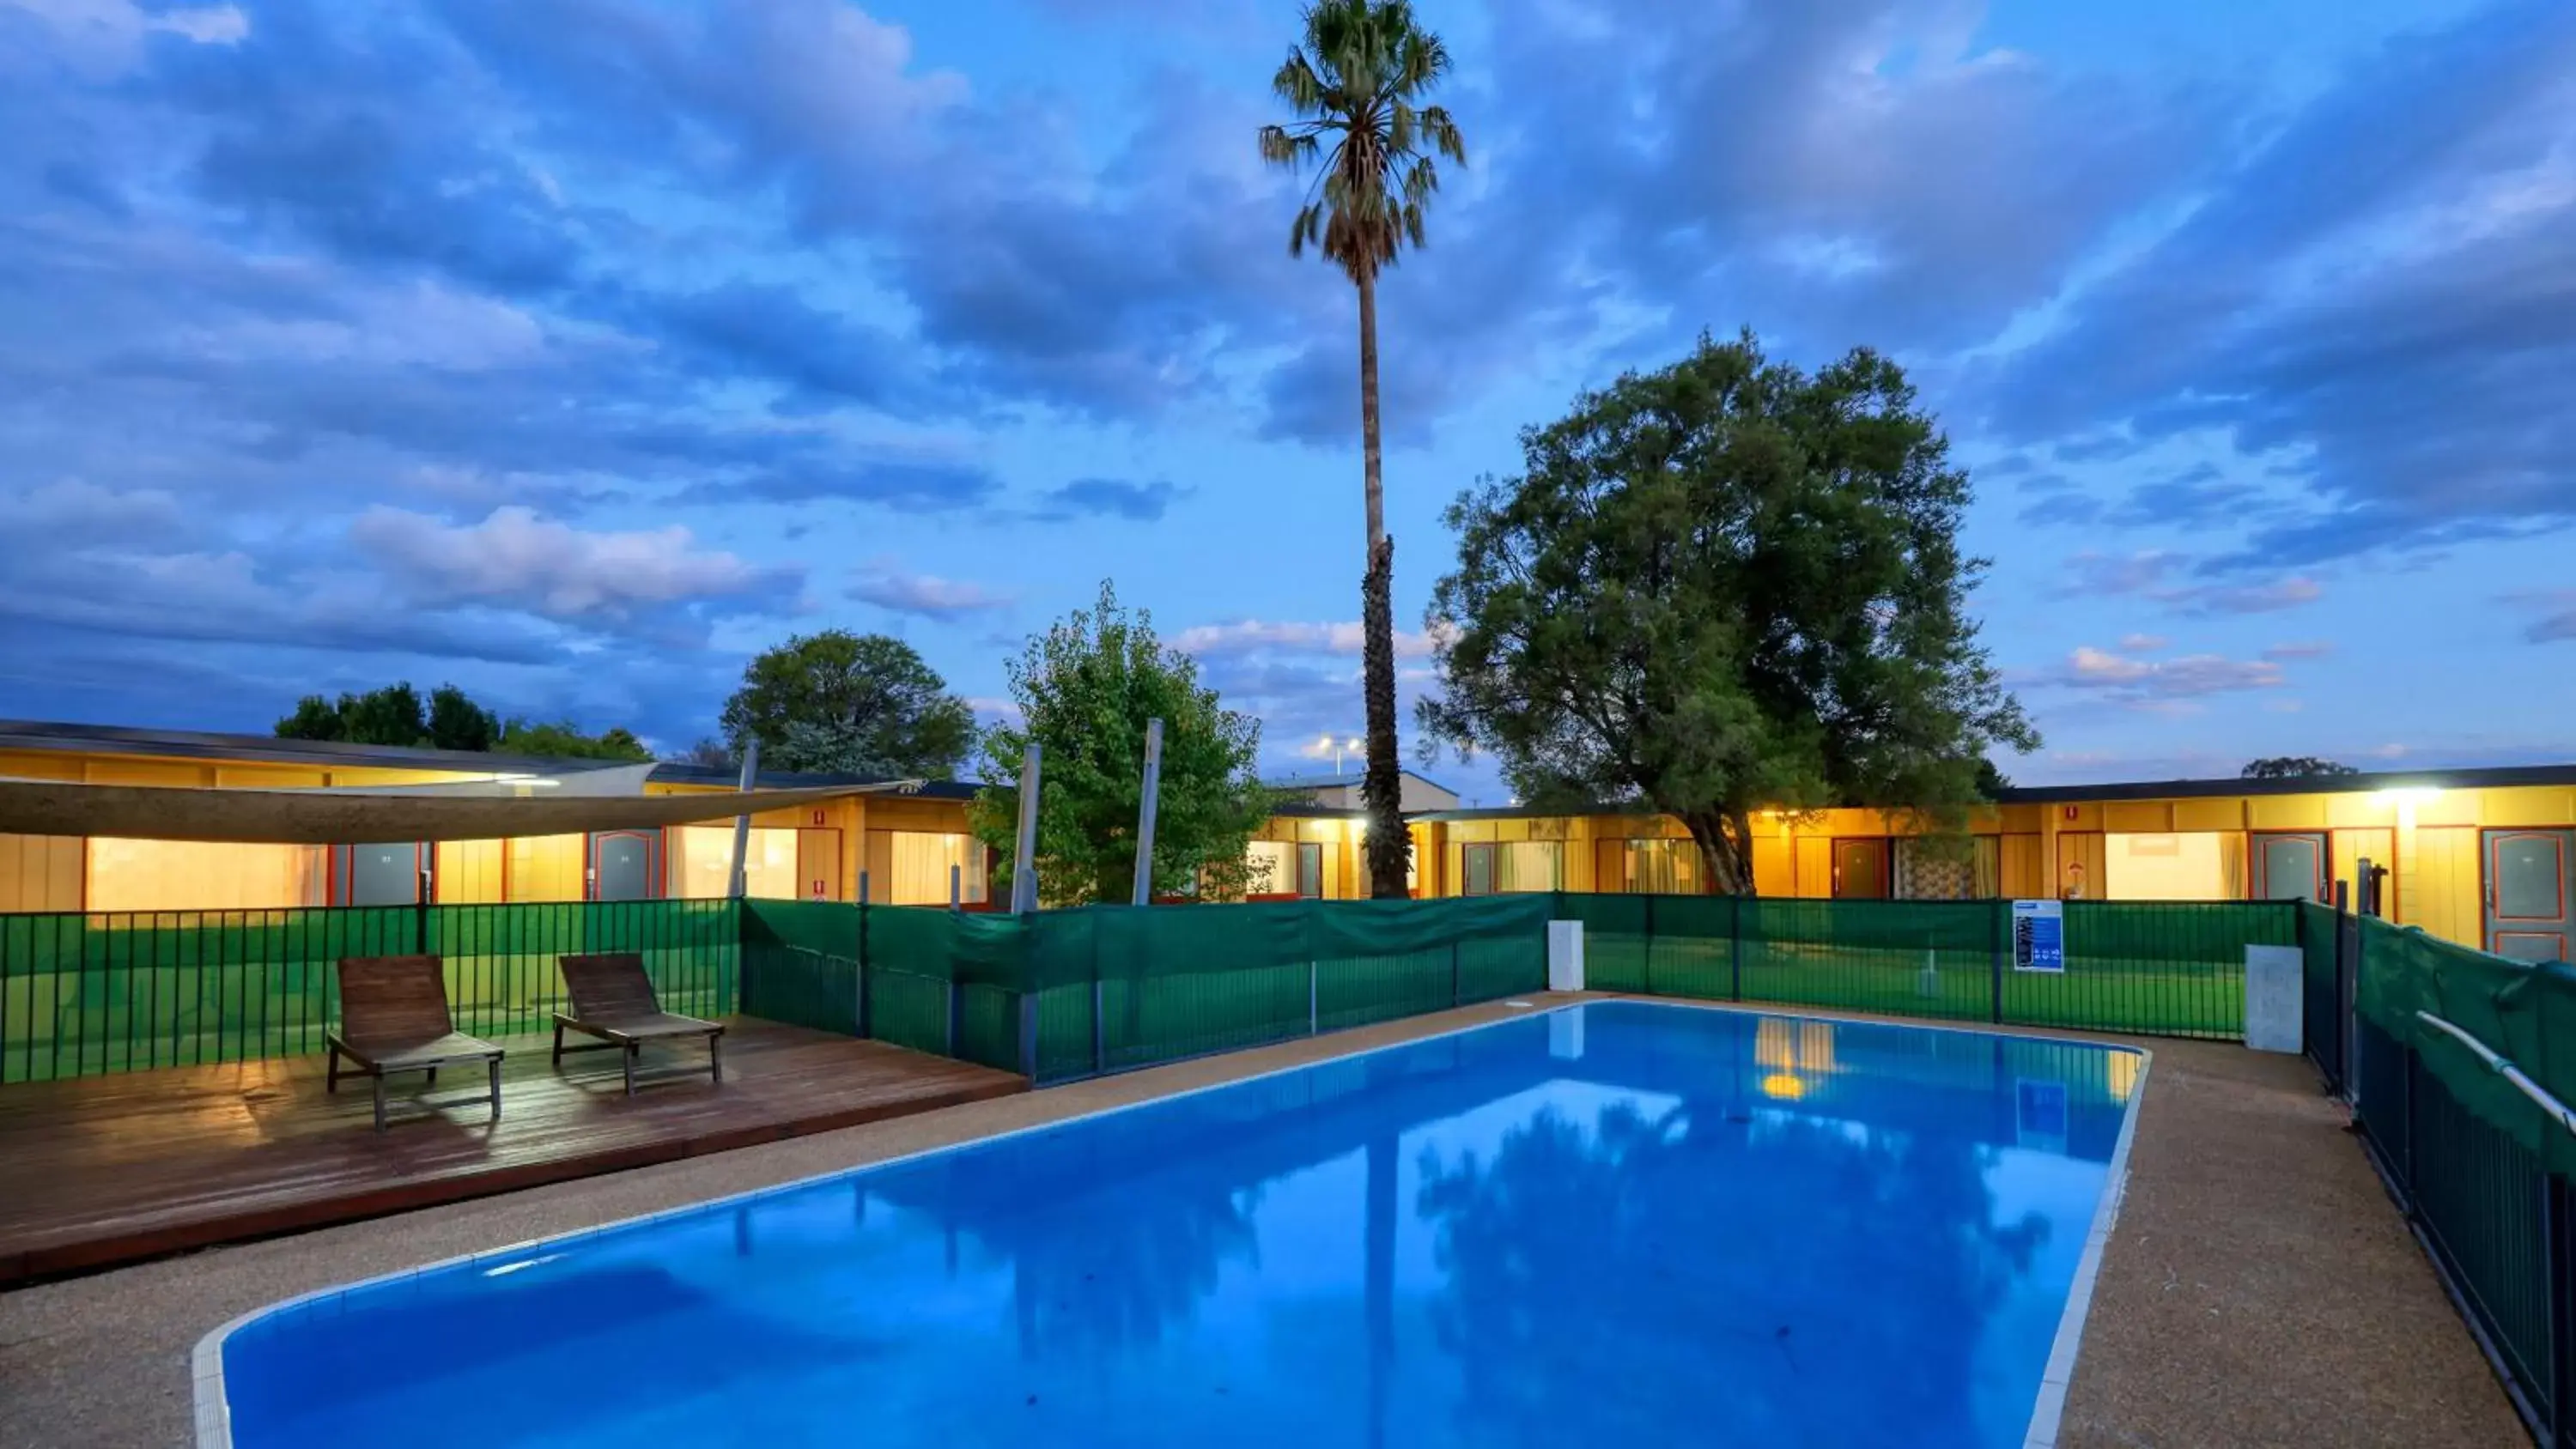 Property building, Swimming Pool in Cootamundra Gardens Motel